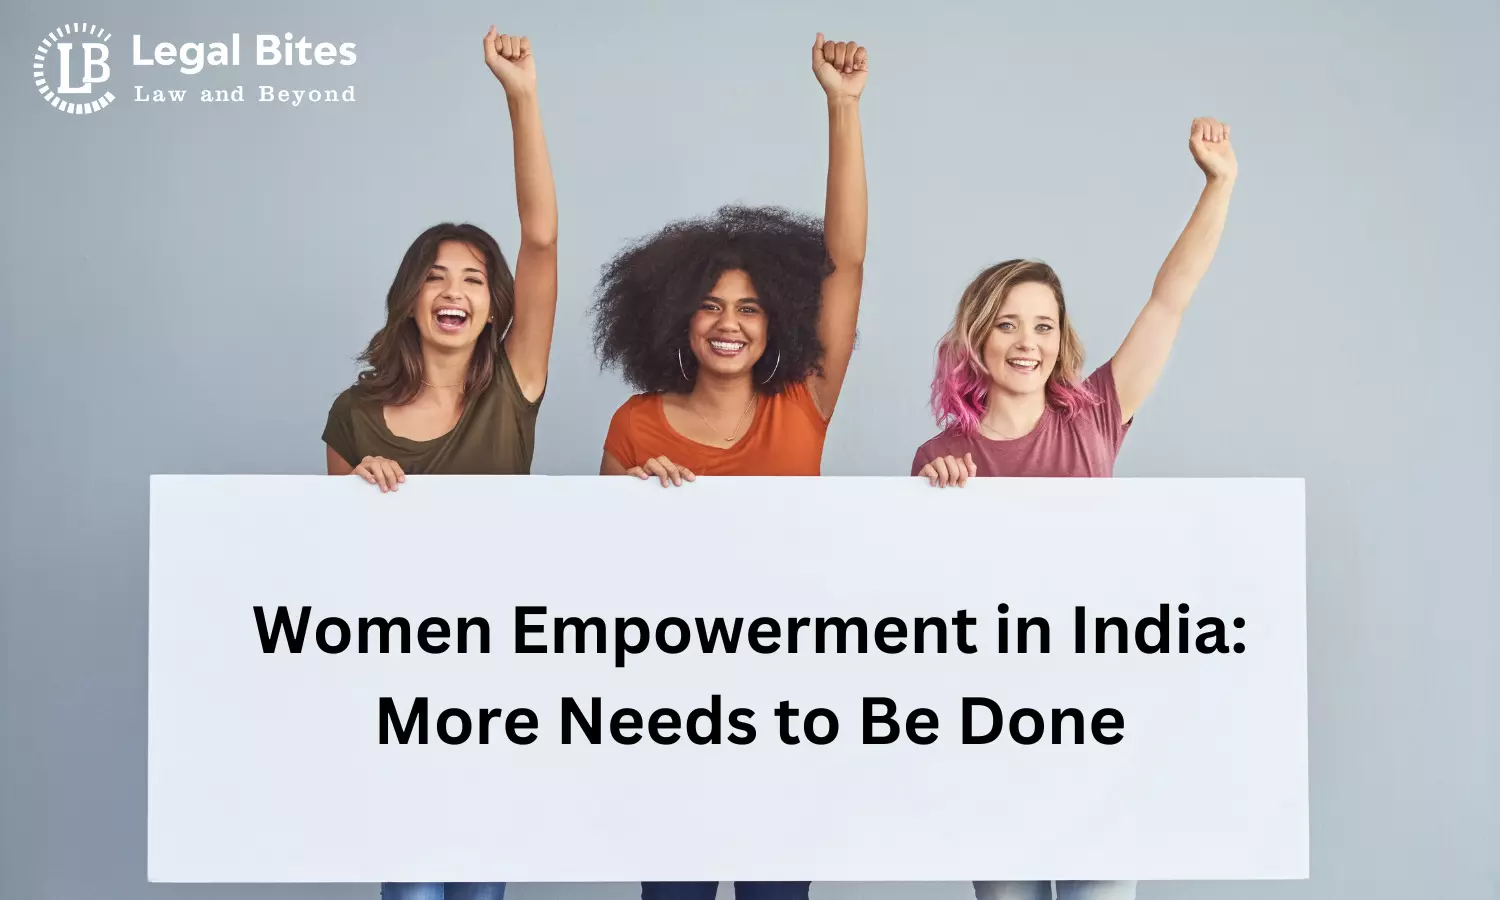 Women Empowerment in India: More Needs to Be Done